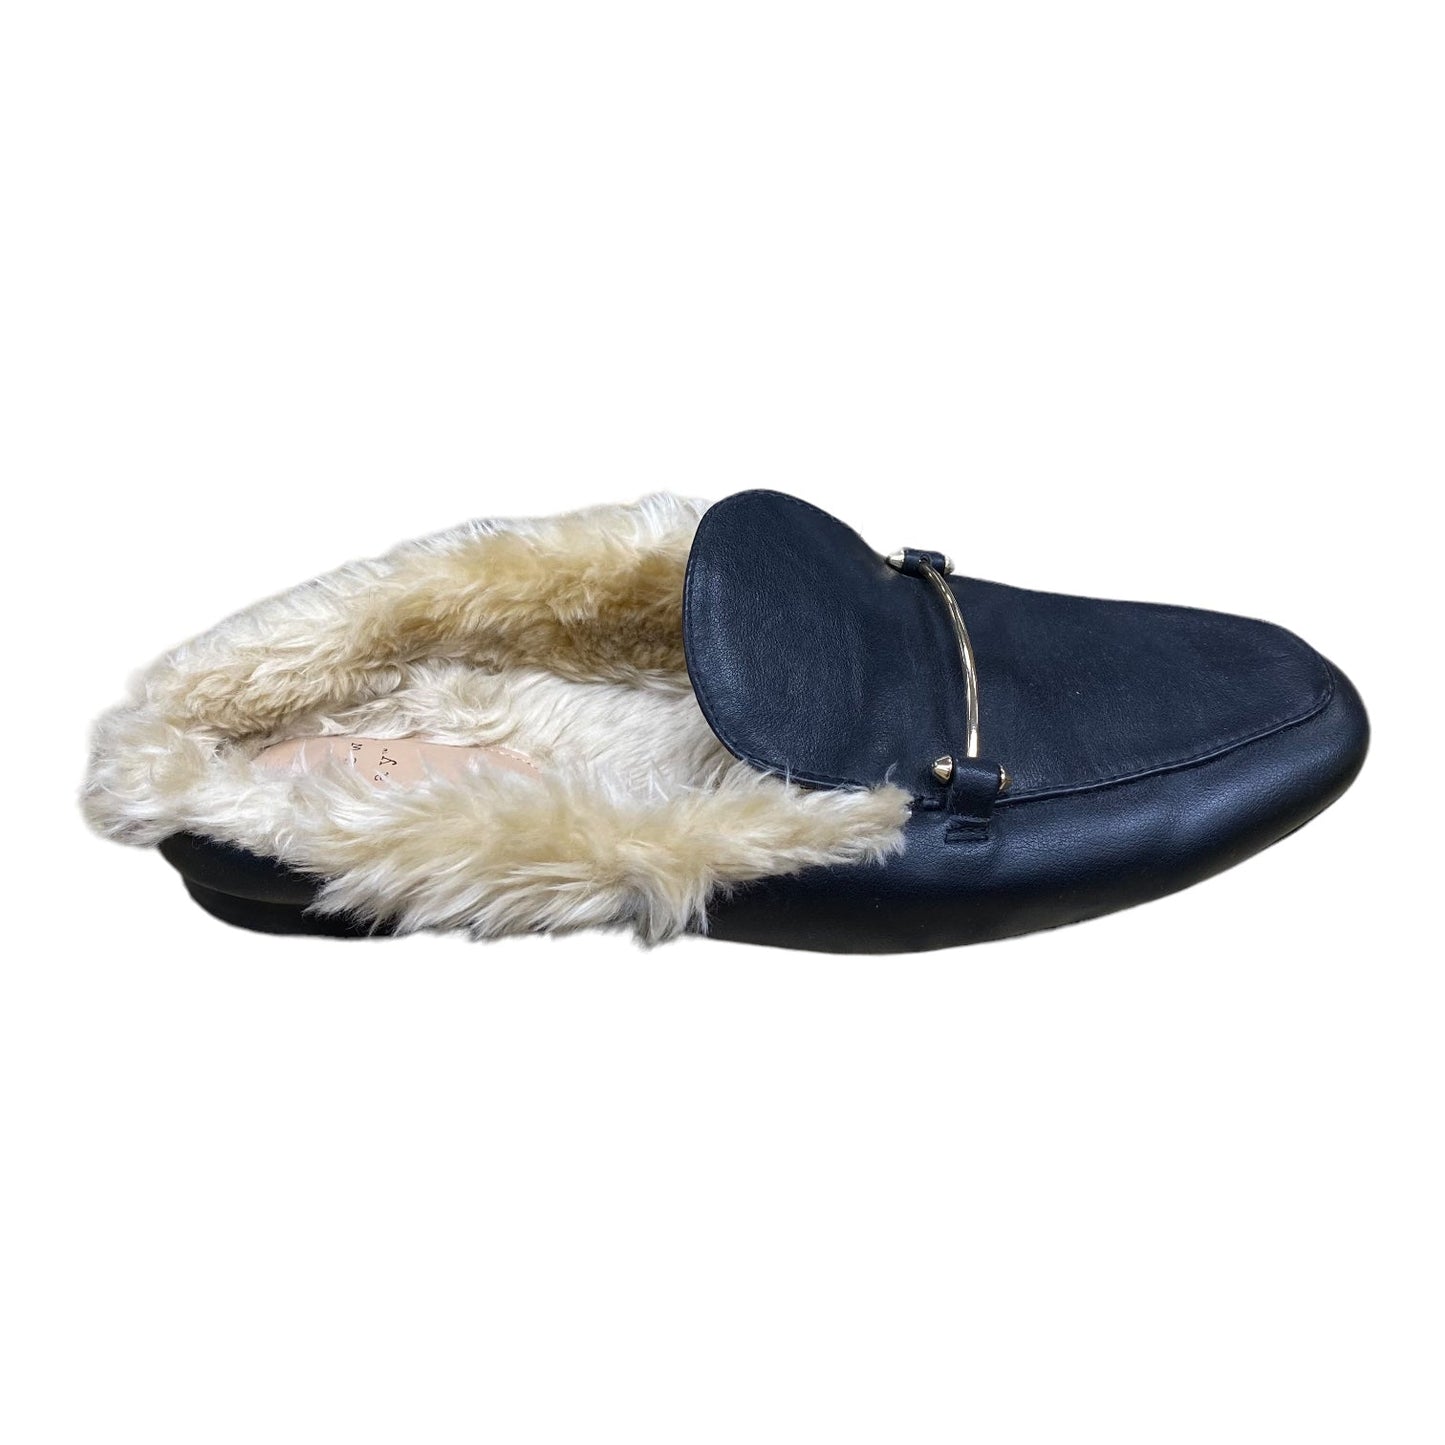 Shoes Flats Mule & Slide By A New Day  Size: 10